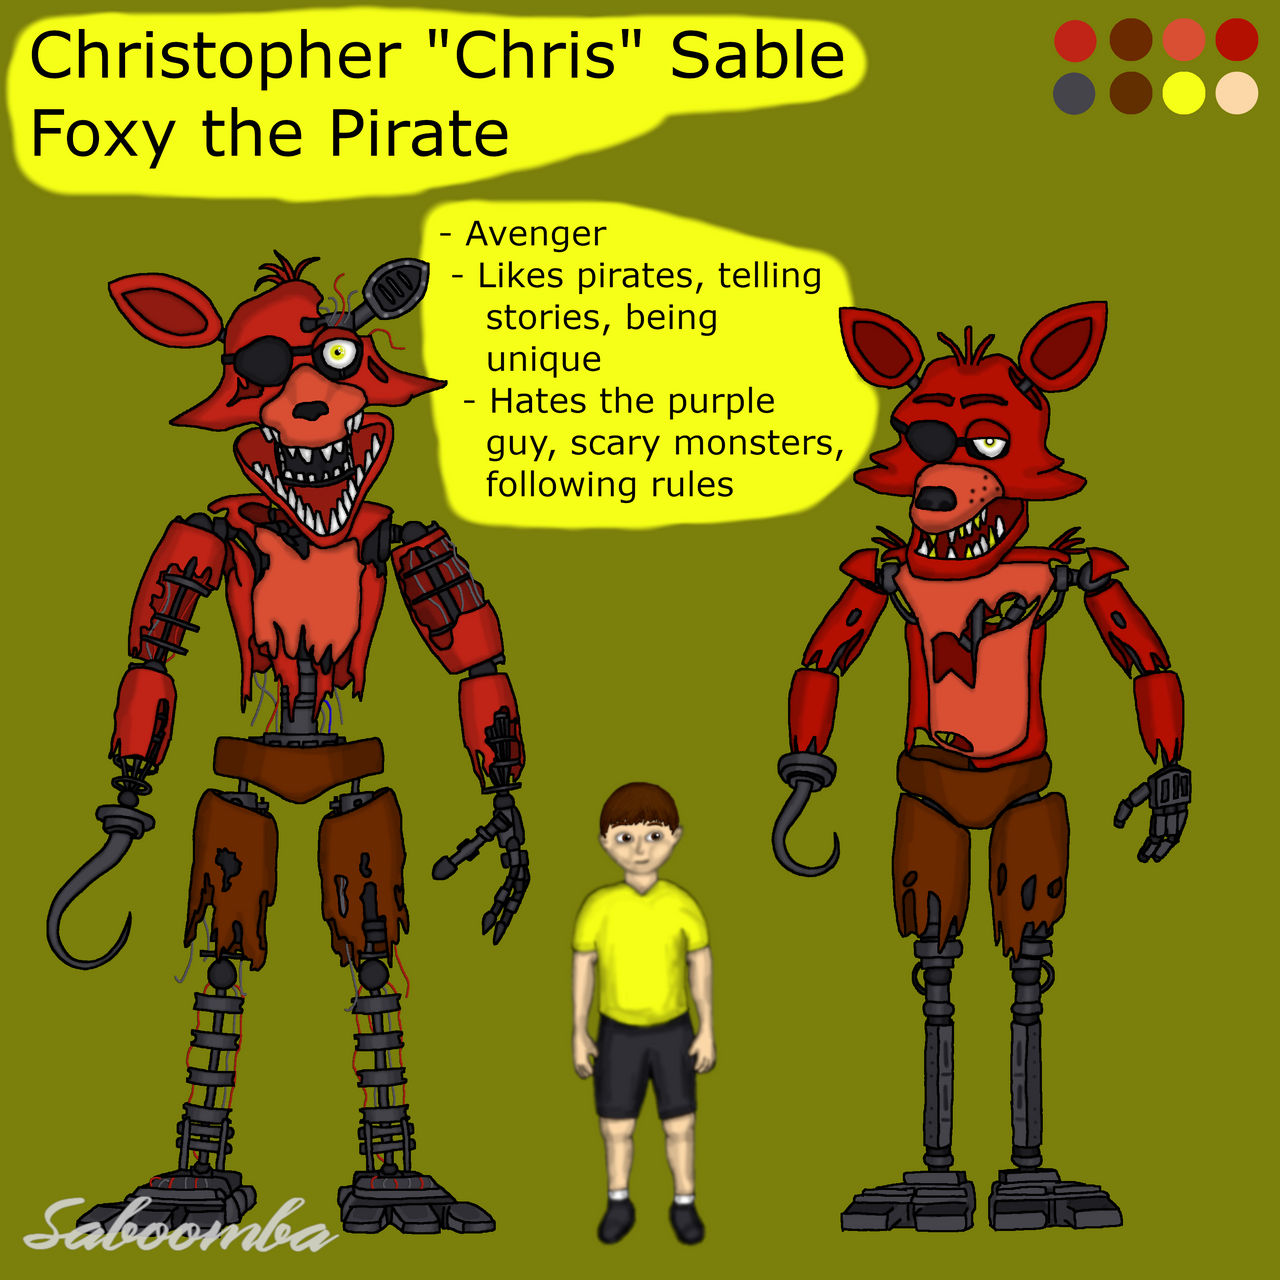 Christopher Sable / Foxy the Pirate by Saboomba on DeviantArt